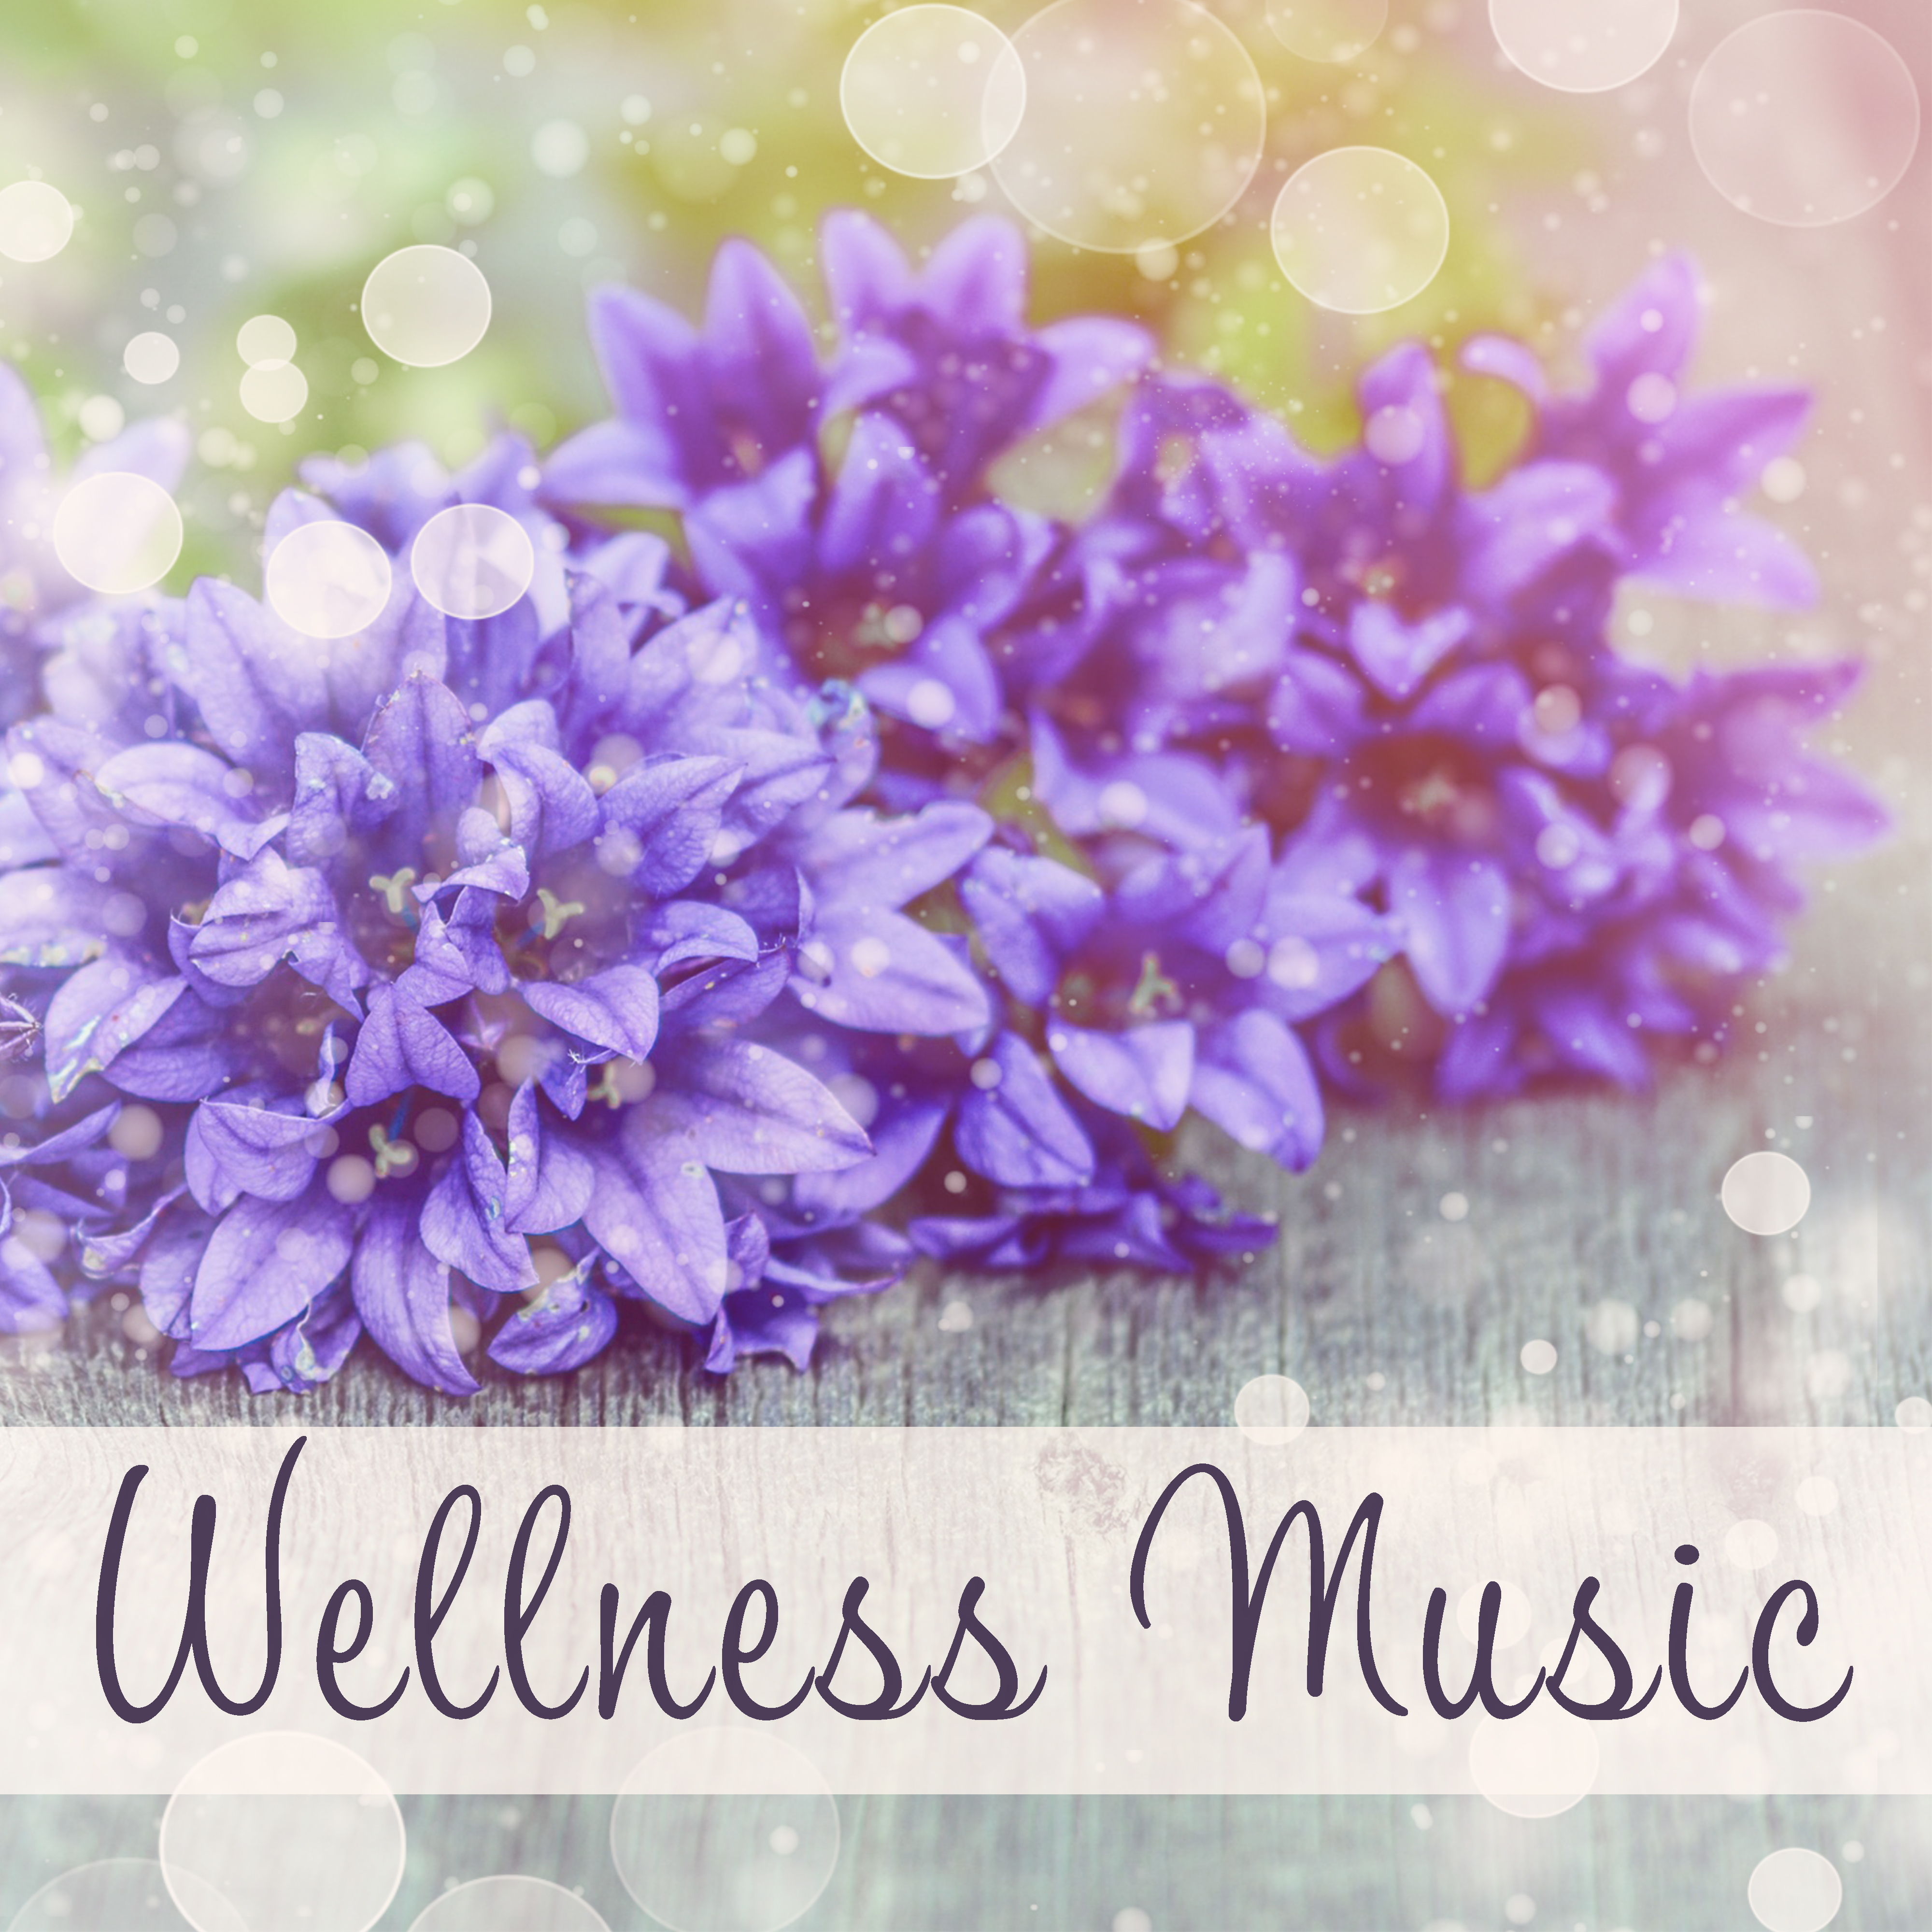 Wellness Music  Delicate Melodies for Spa, Sleep, Massage, Zen Spa, Sounds of Sea, Relaxing Songs